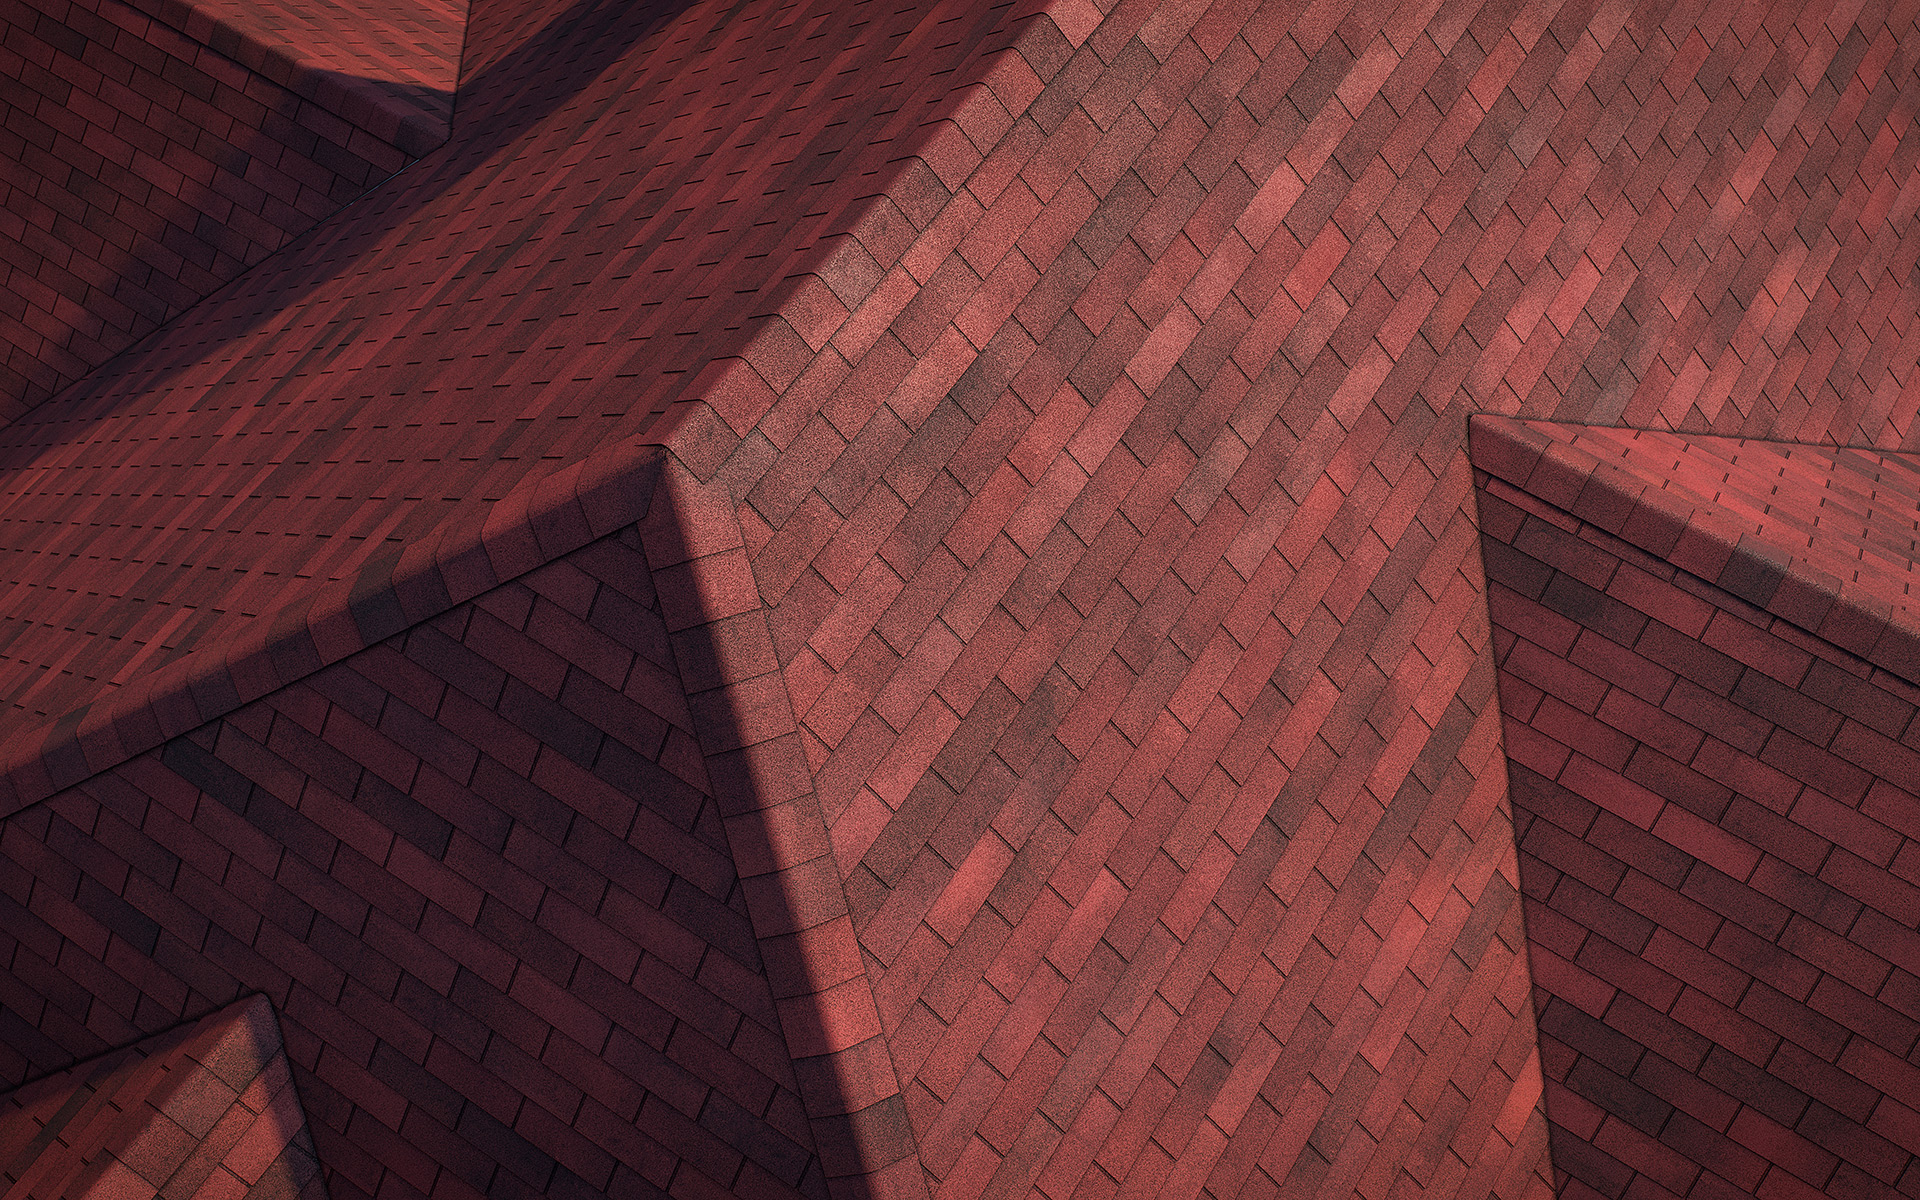 3-tab asphalt roof shingles red color 3D model preset for 3dsmax and RailClone. Rendered with vray, made for arch-viz.